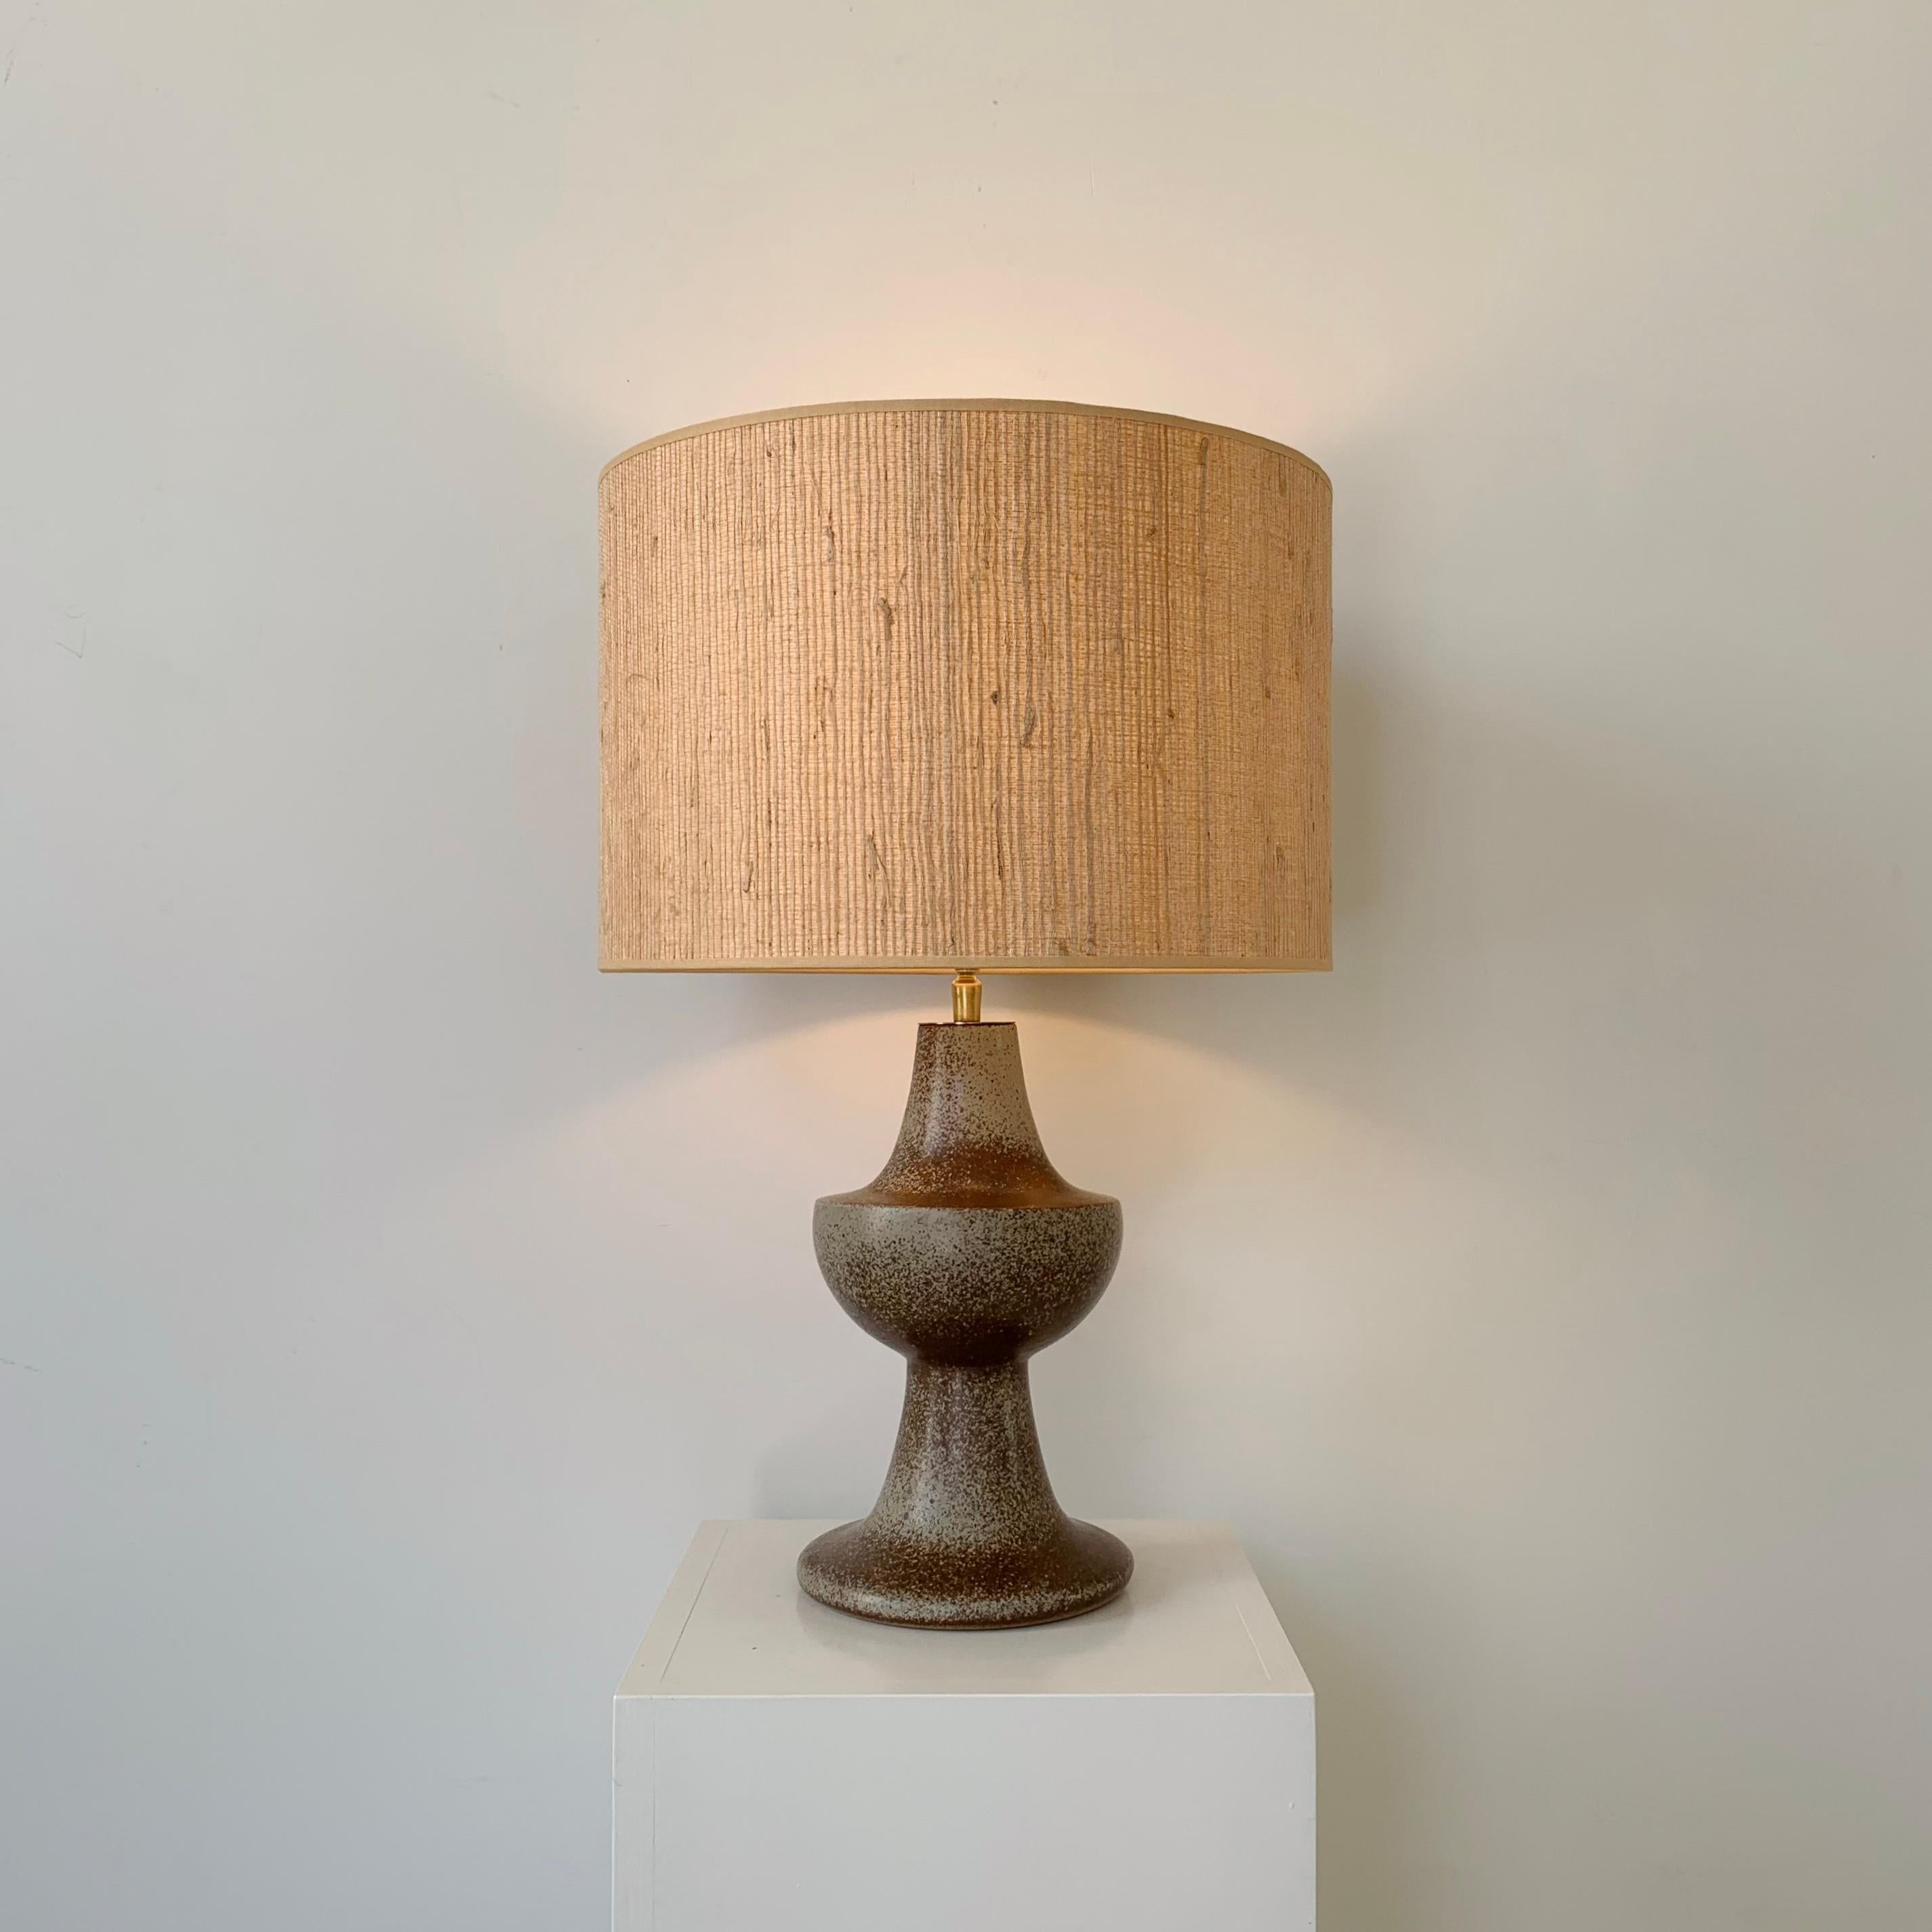 Midcentury Ceramic Table Lamp, circa 1960, France For Sale 9